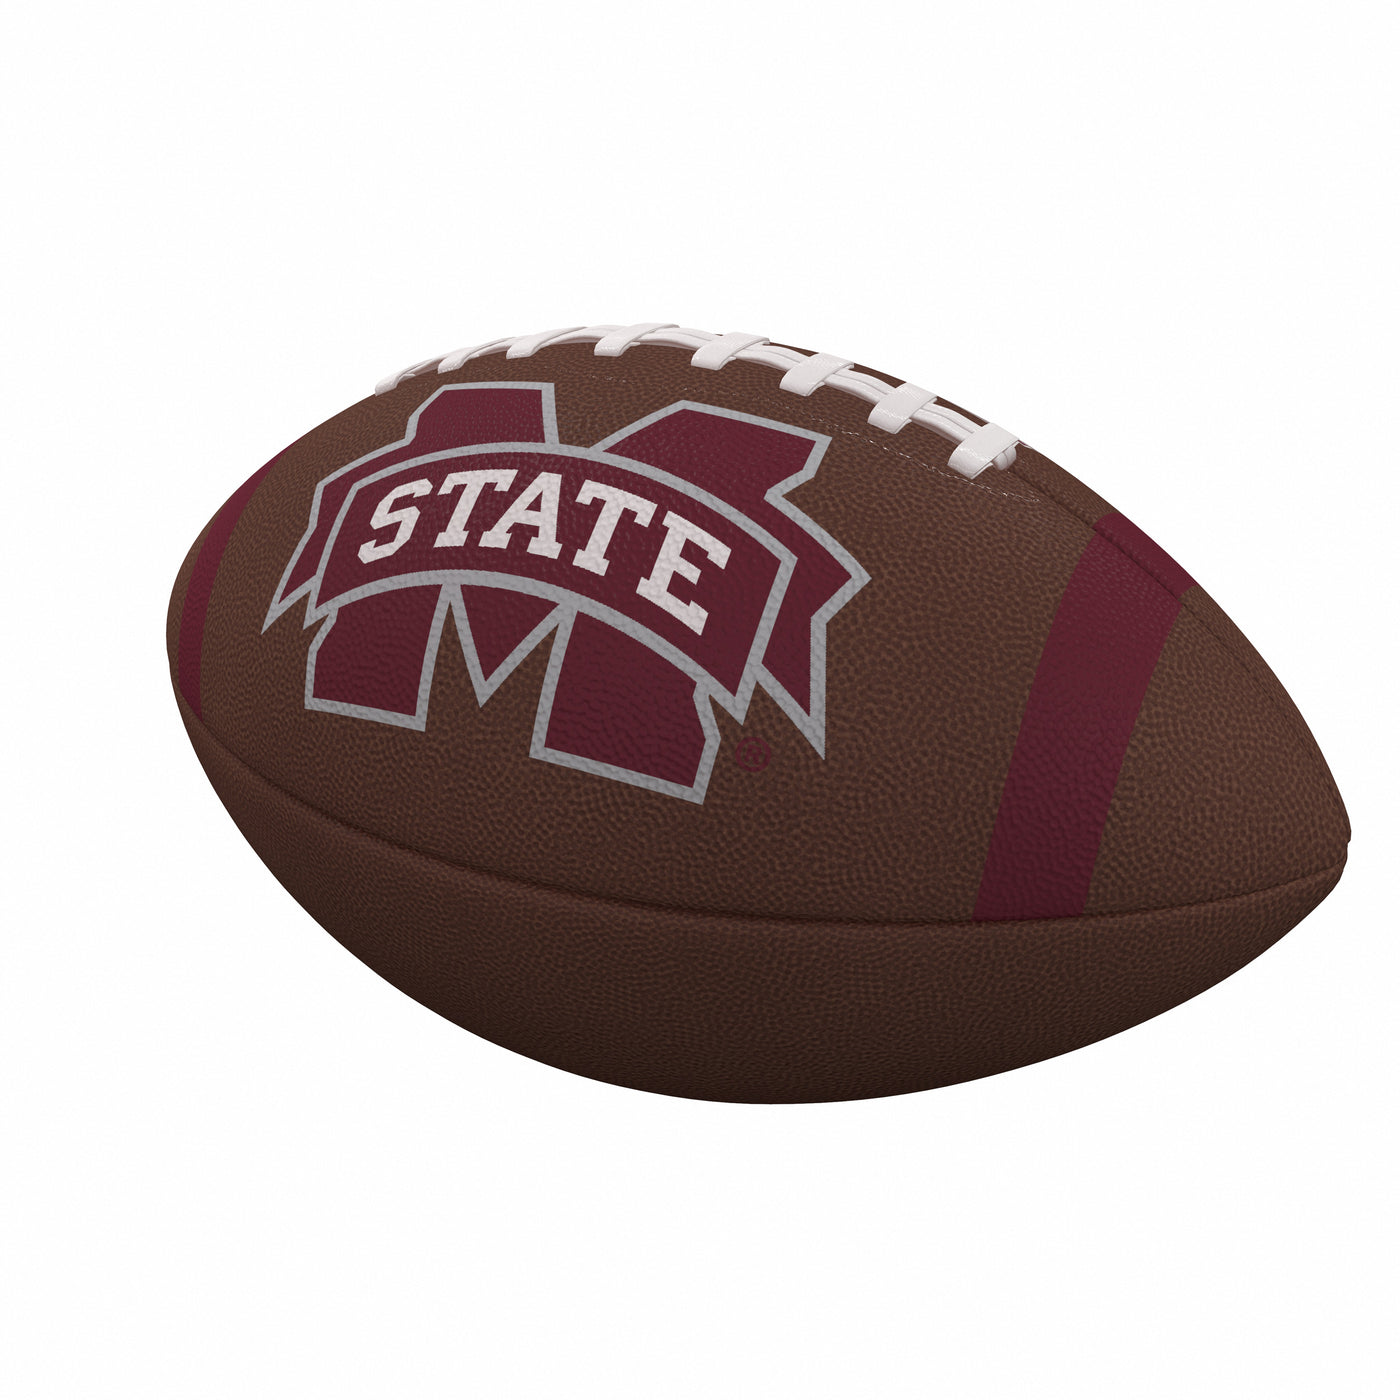 Mississippi State Team Stripe Official-Size Composite Football